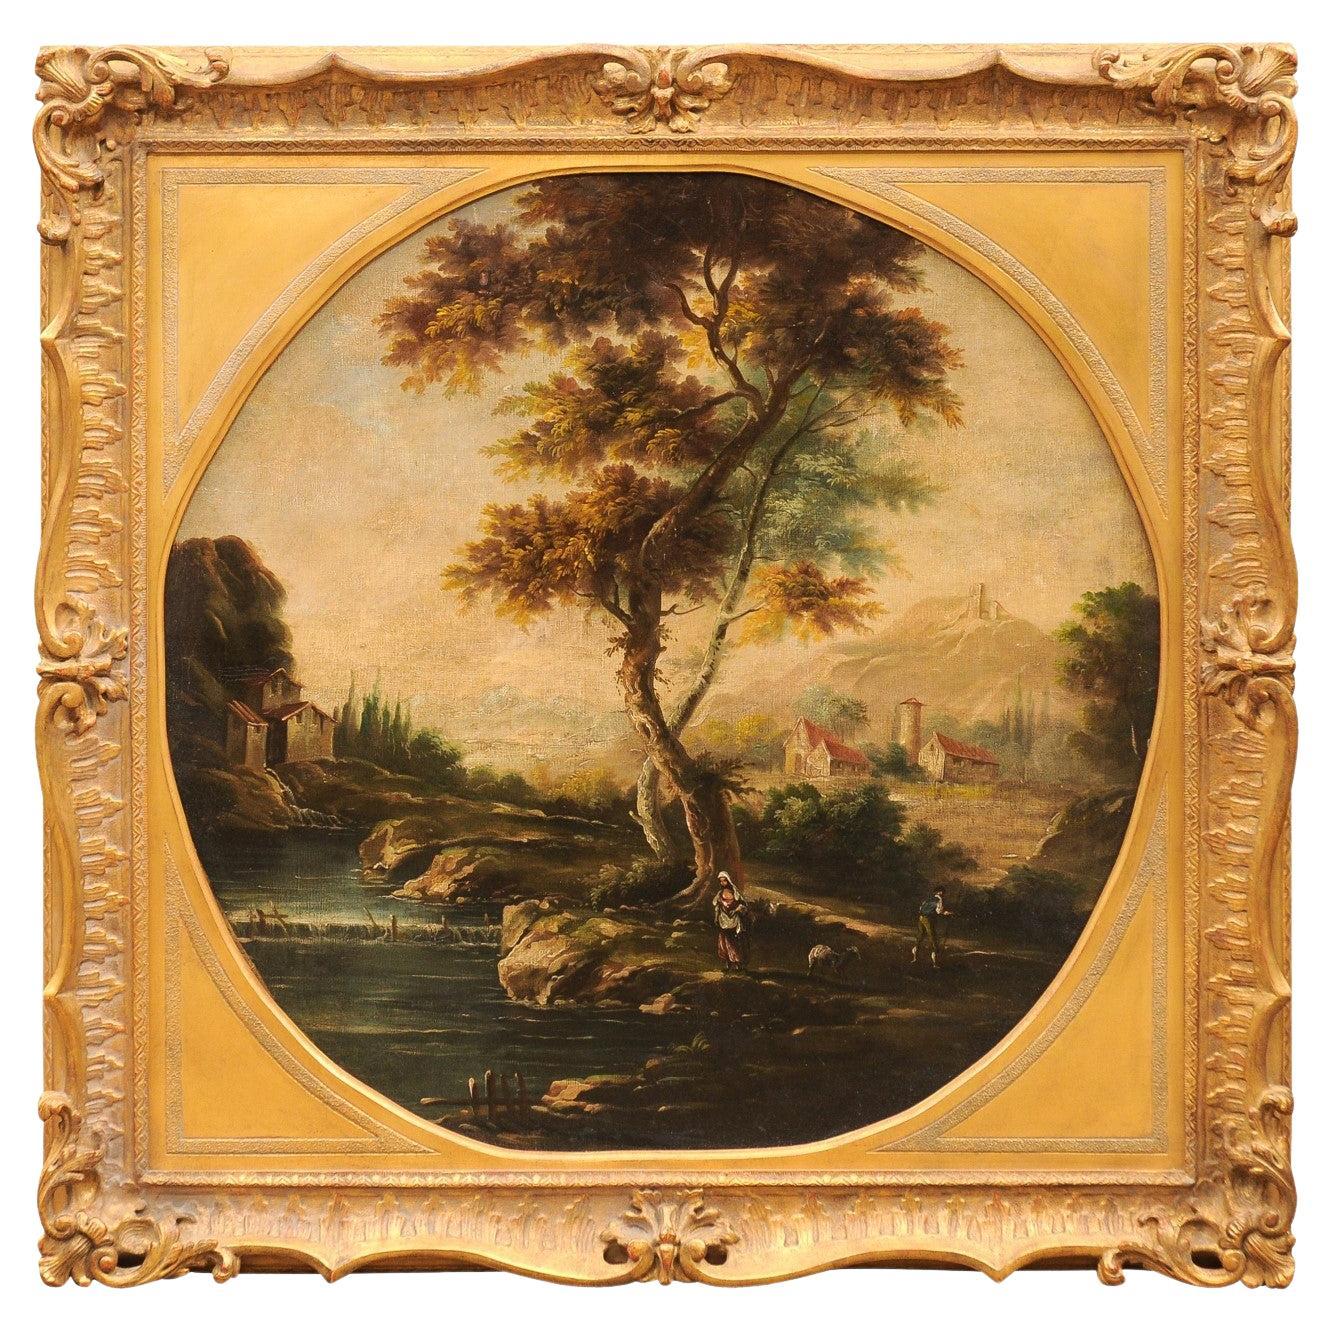 Large 19th Century English Oil on Canvas Landscape Painting in Gilt Frame For Sale